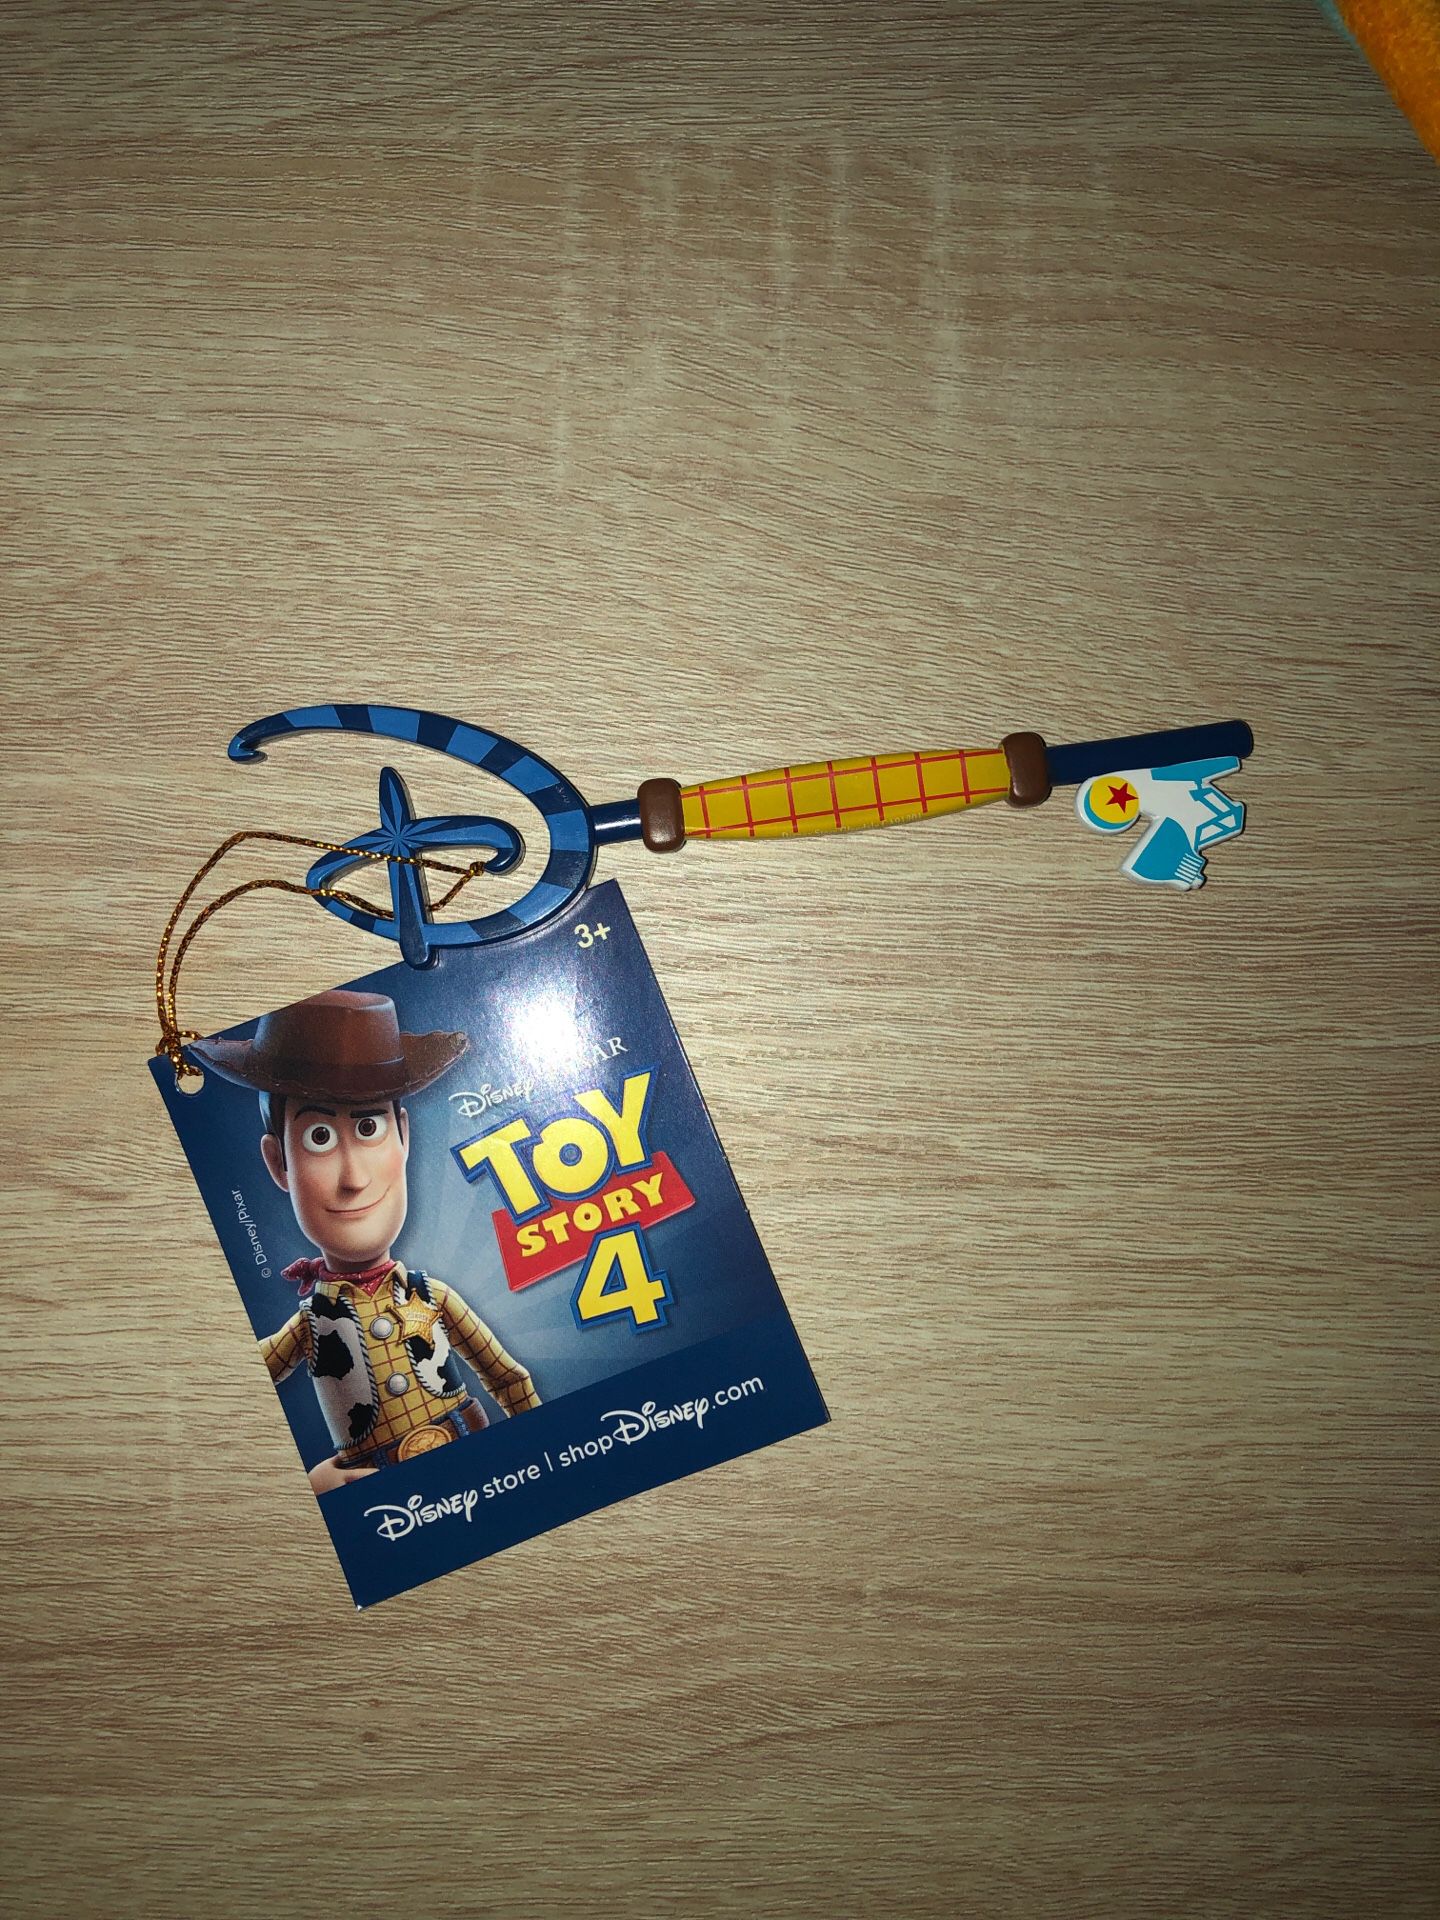 NEW Disney Store Collectible Toy Story Key Limited Edition